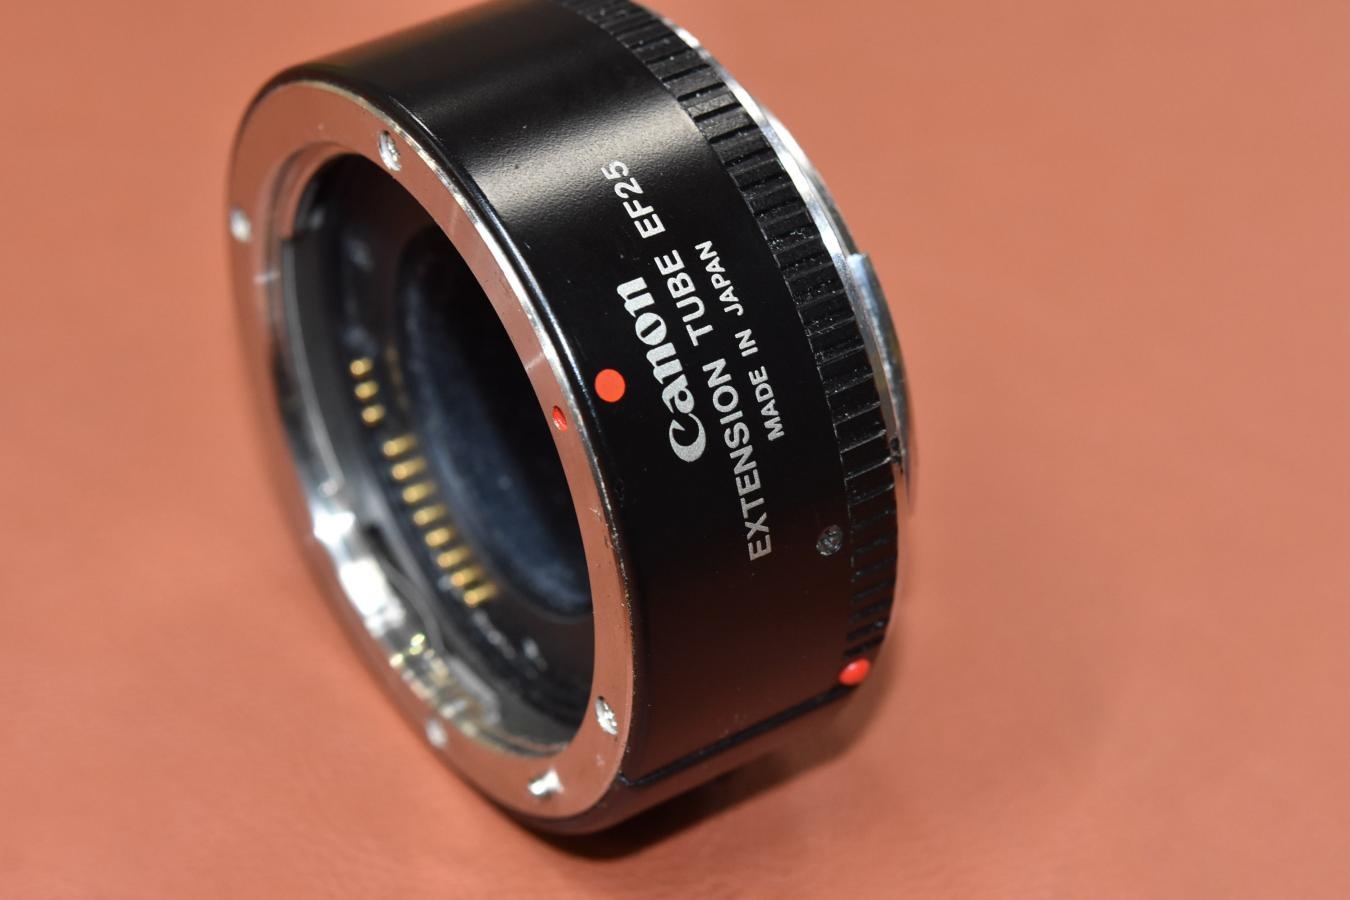 Canon EXTENTION TUBE EF25